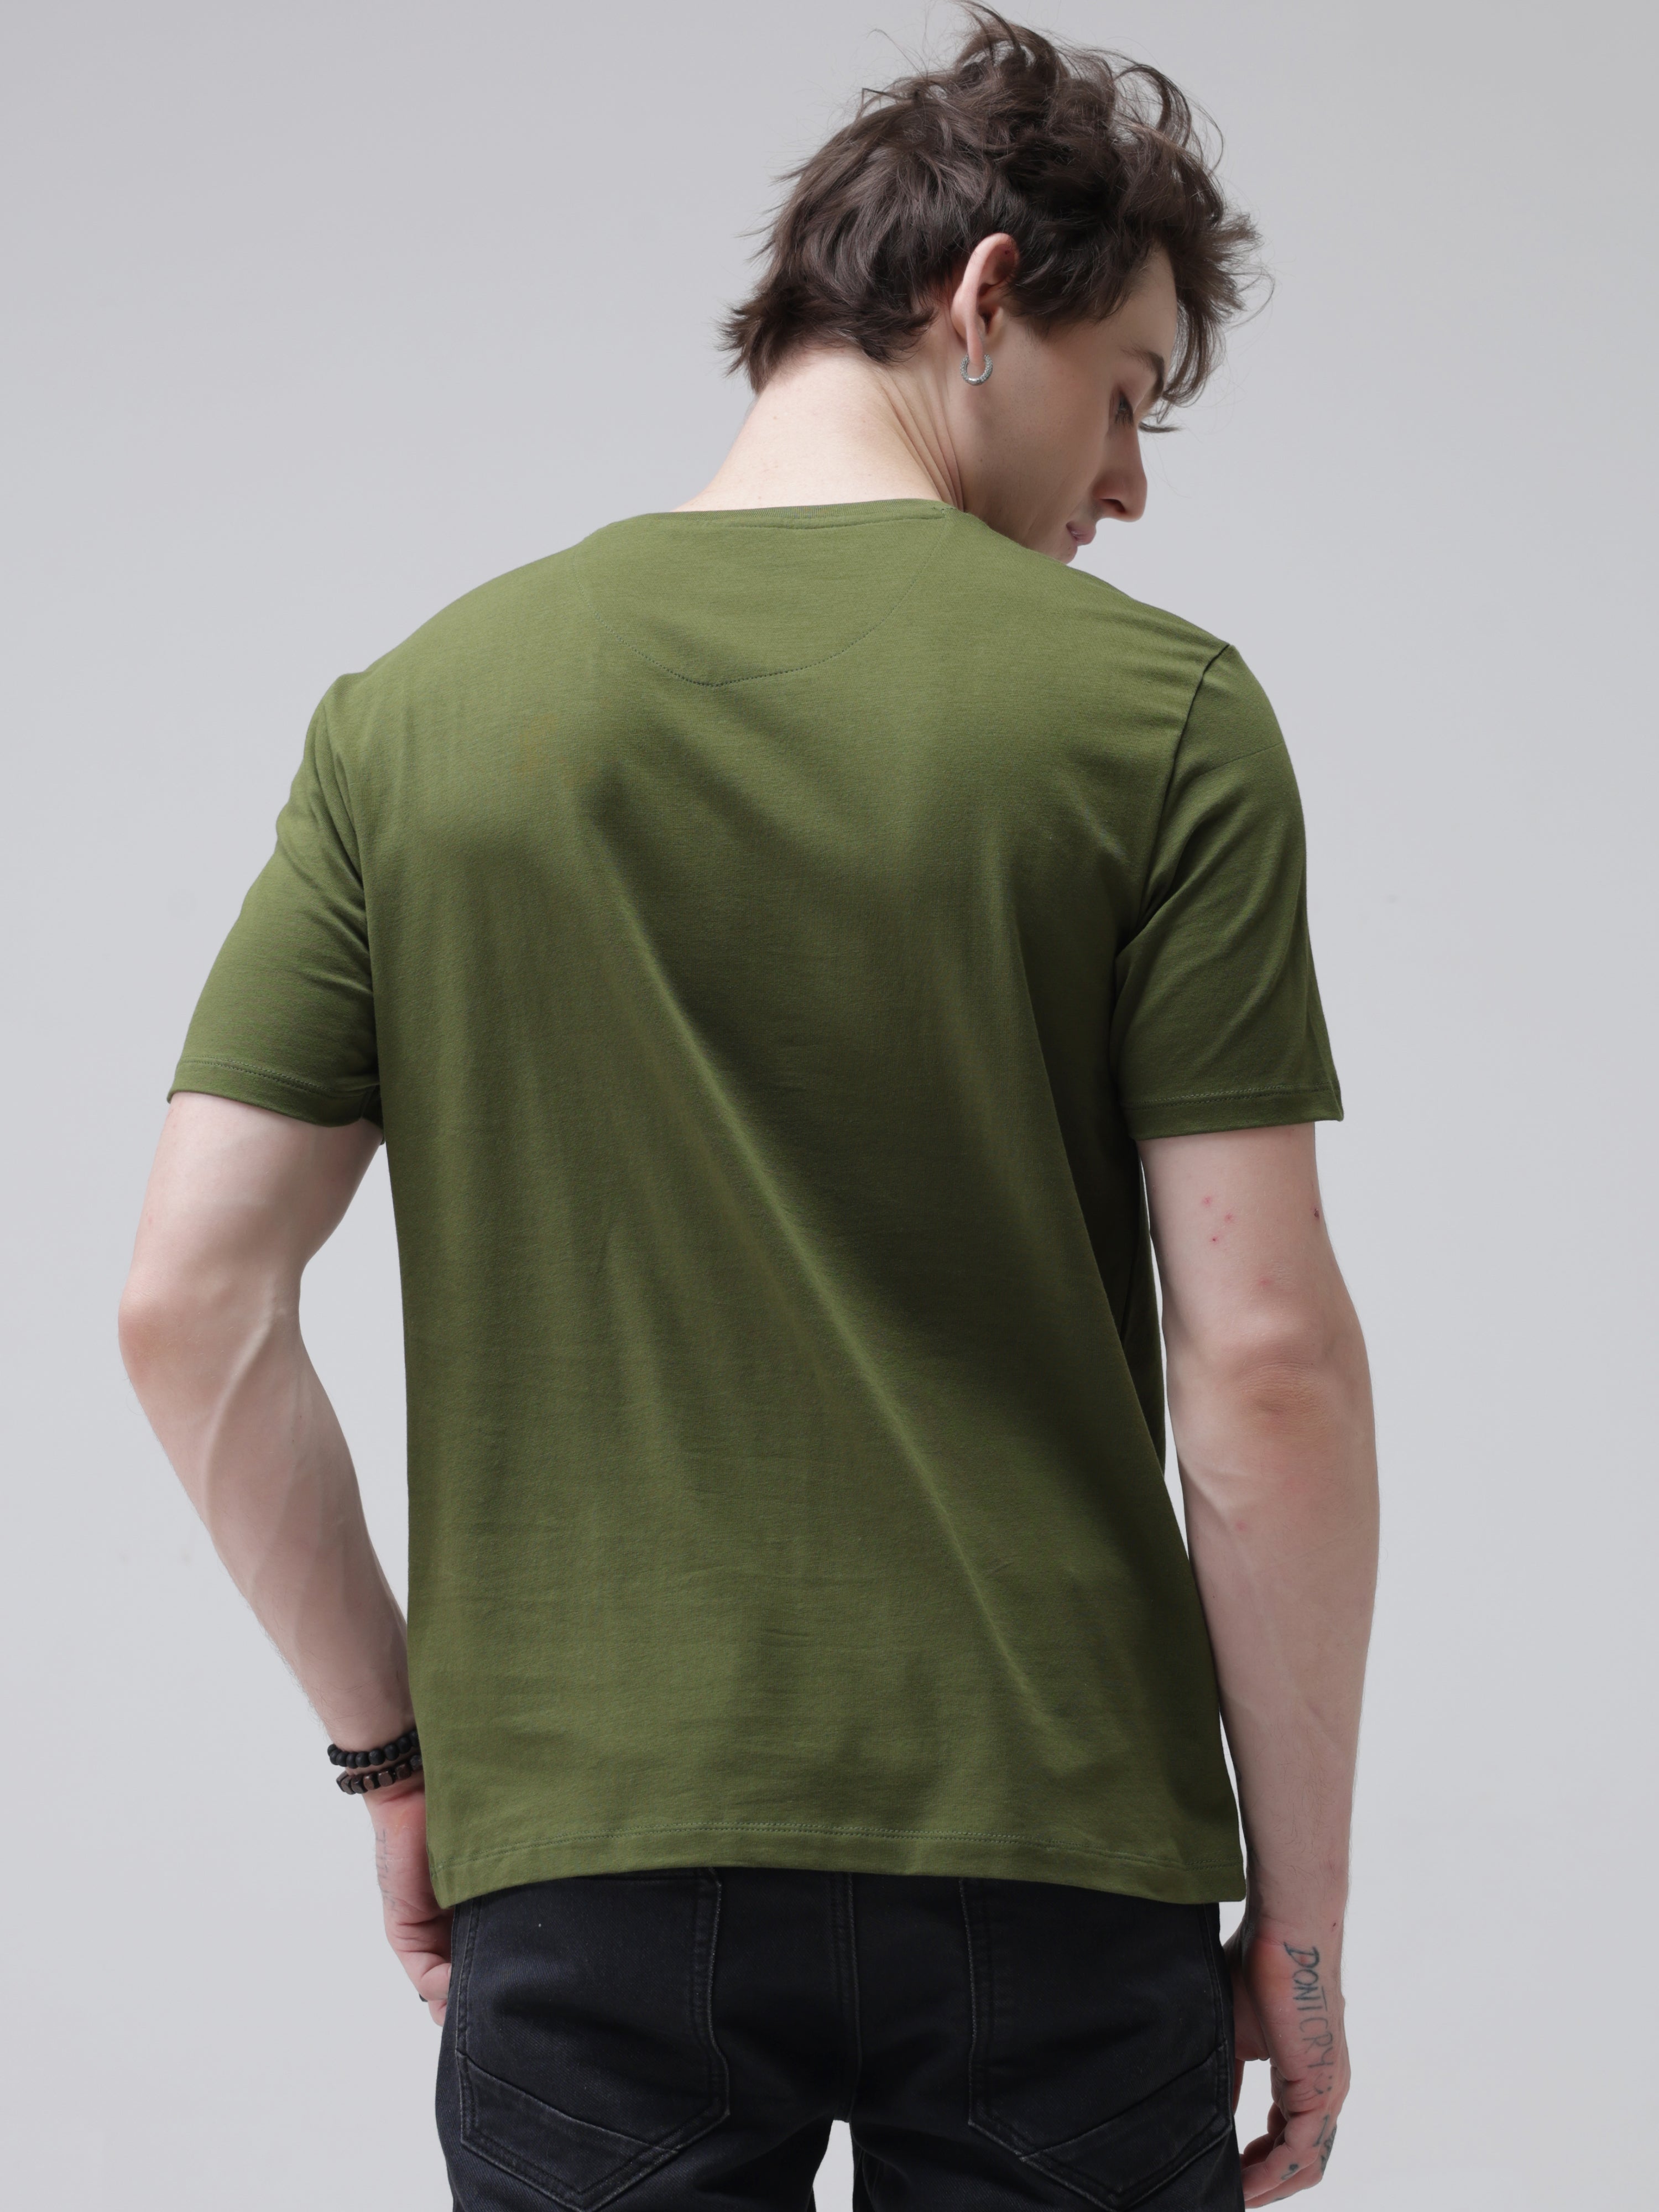 Man wearing green round-neck Turms polo T-shirt made of premium cotton and spandex, stain-proof, odor-resistant, and tailored fit.